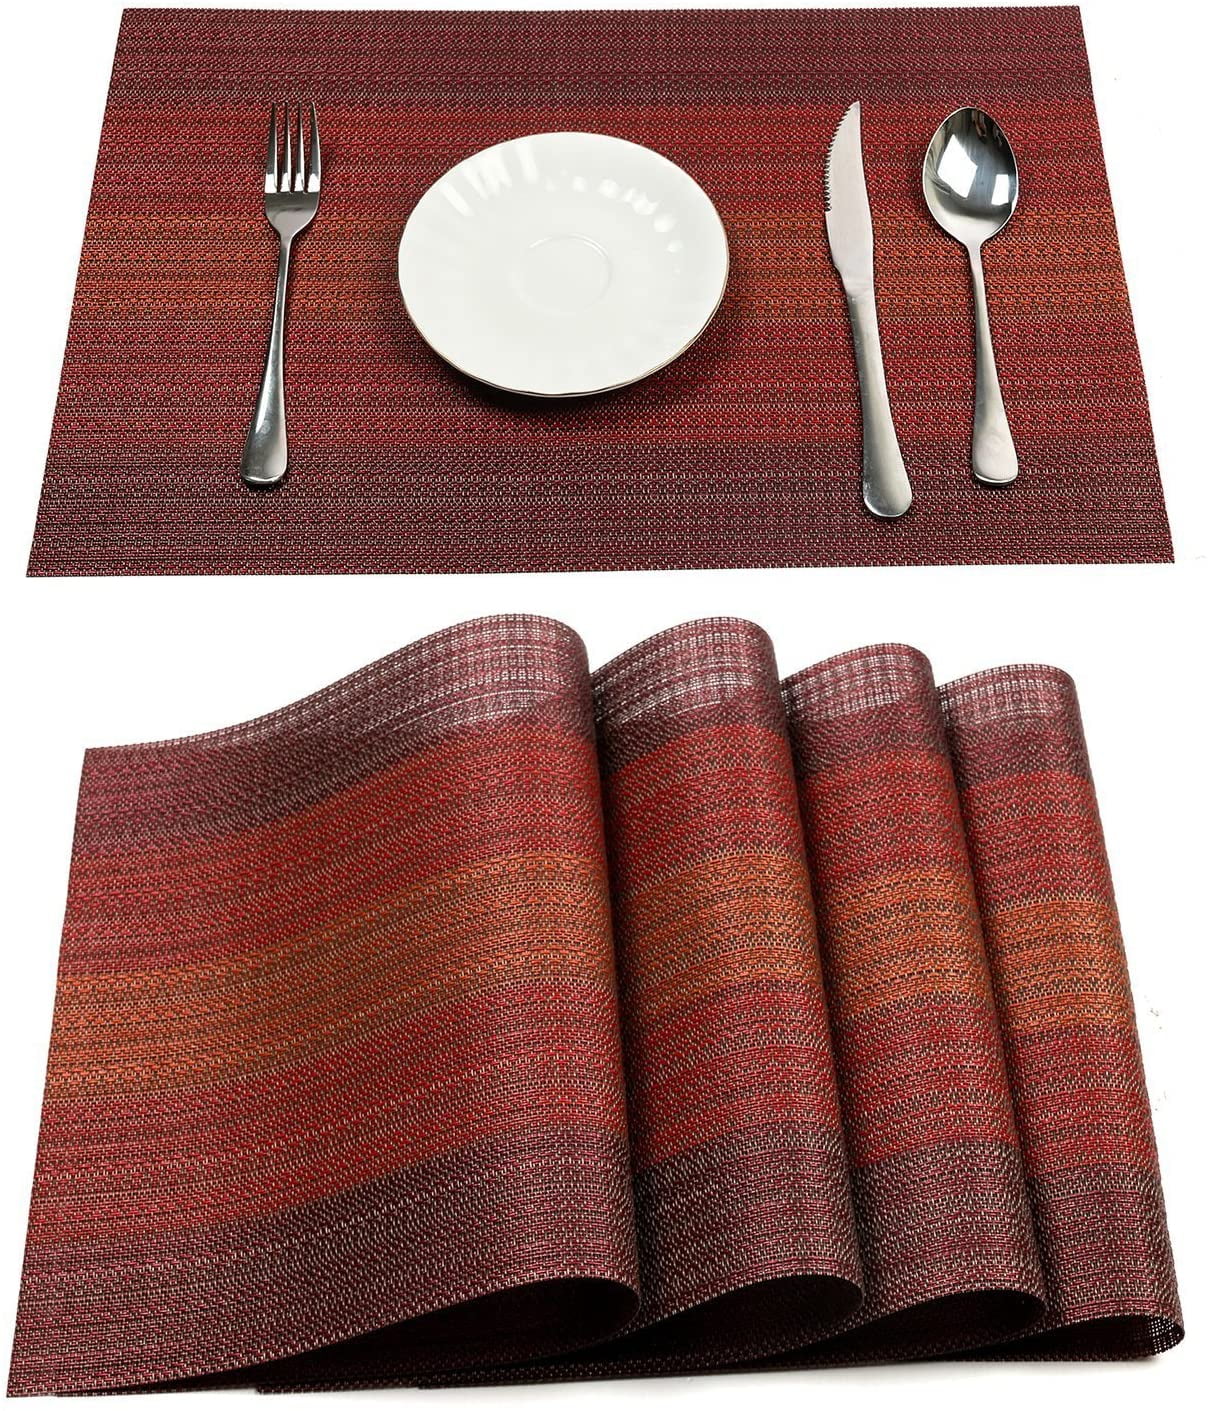 Placemats Kitchen Dinning Table Place Mat Non-slip Dish Bowl Heat Resistant